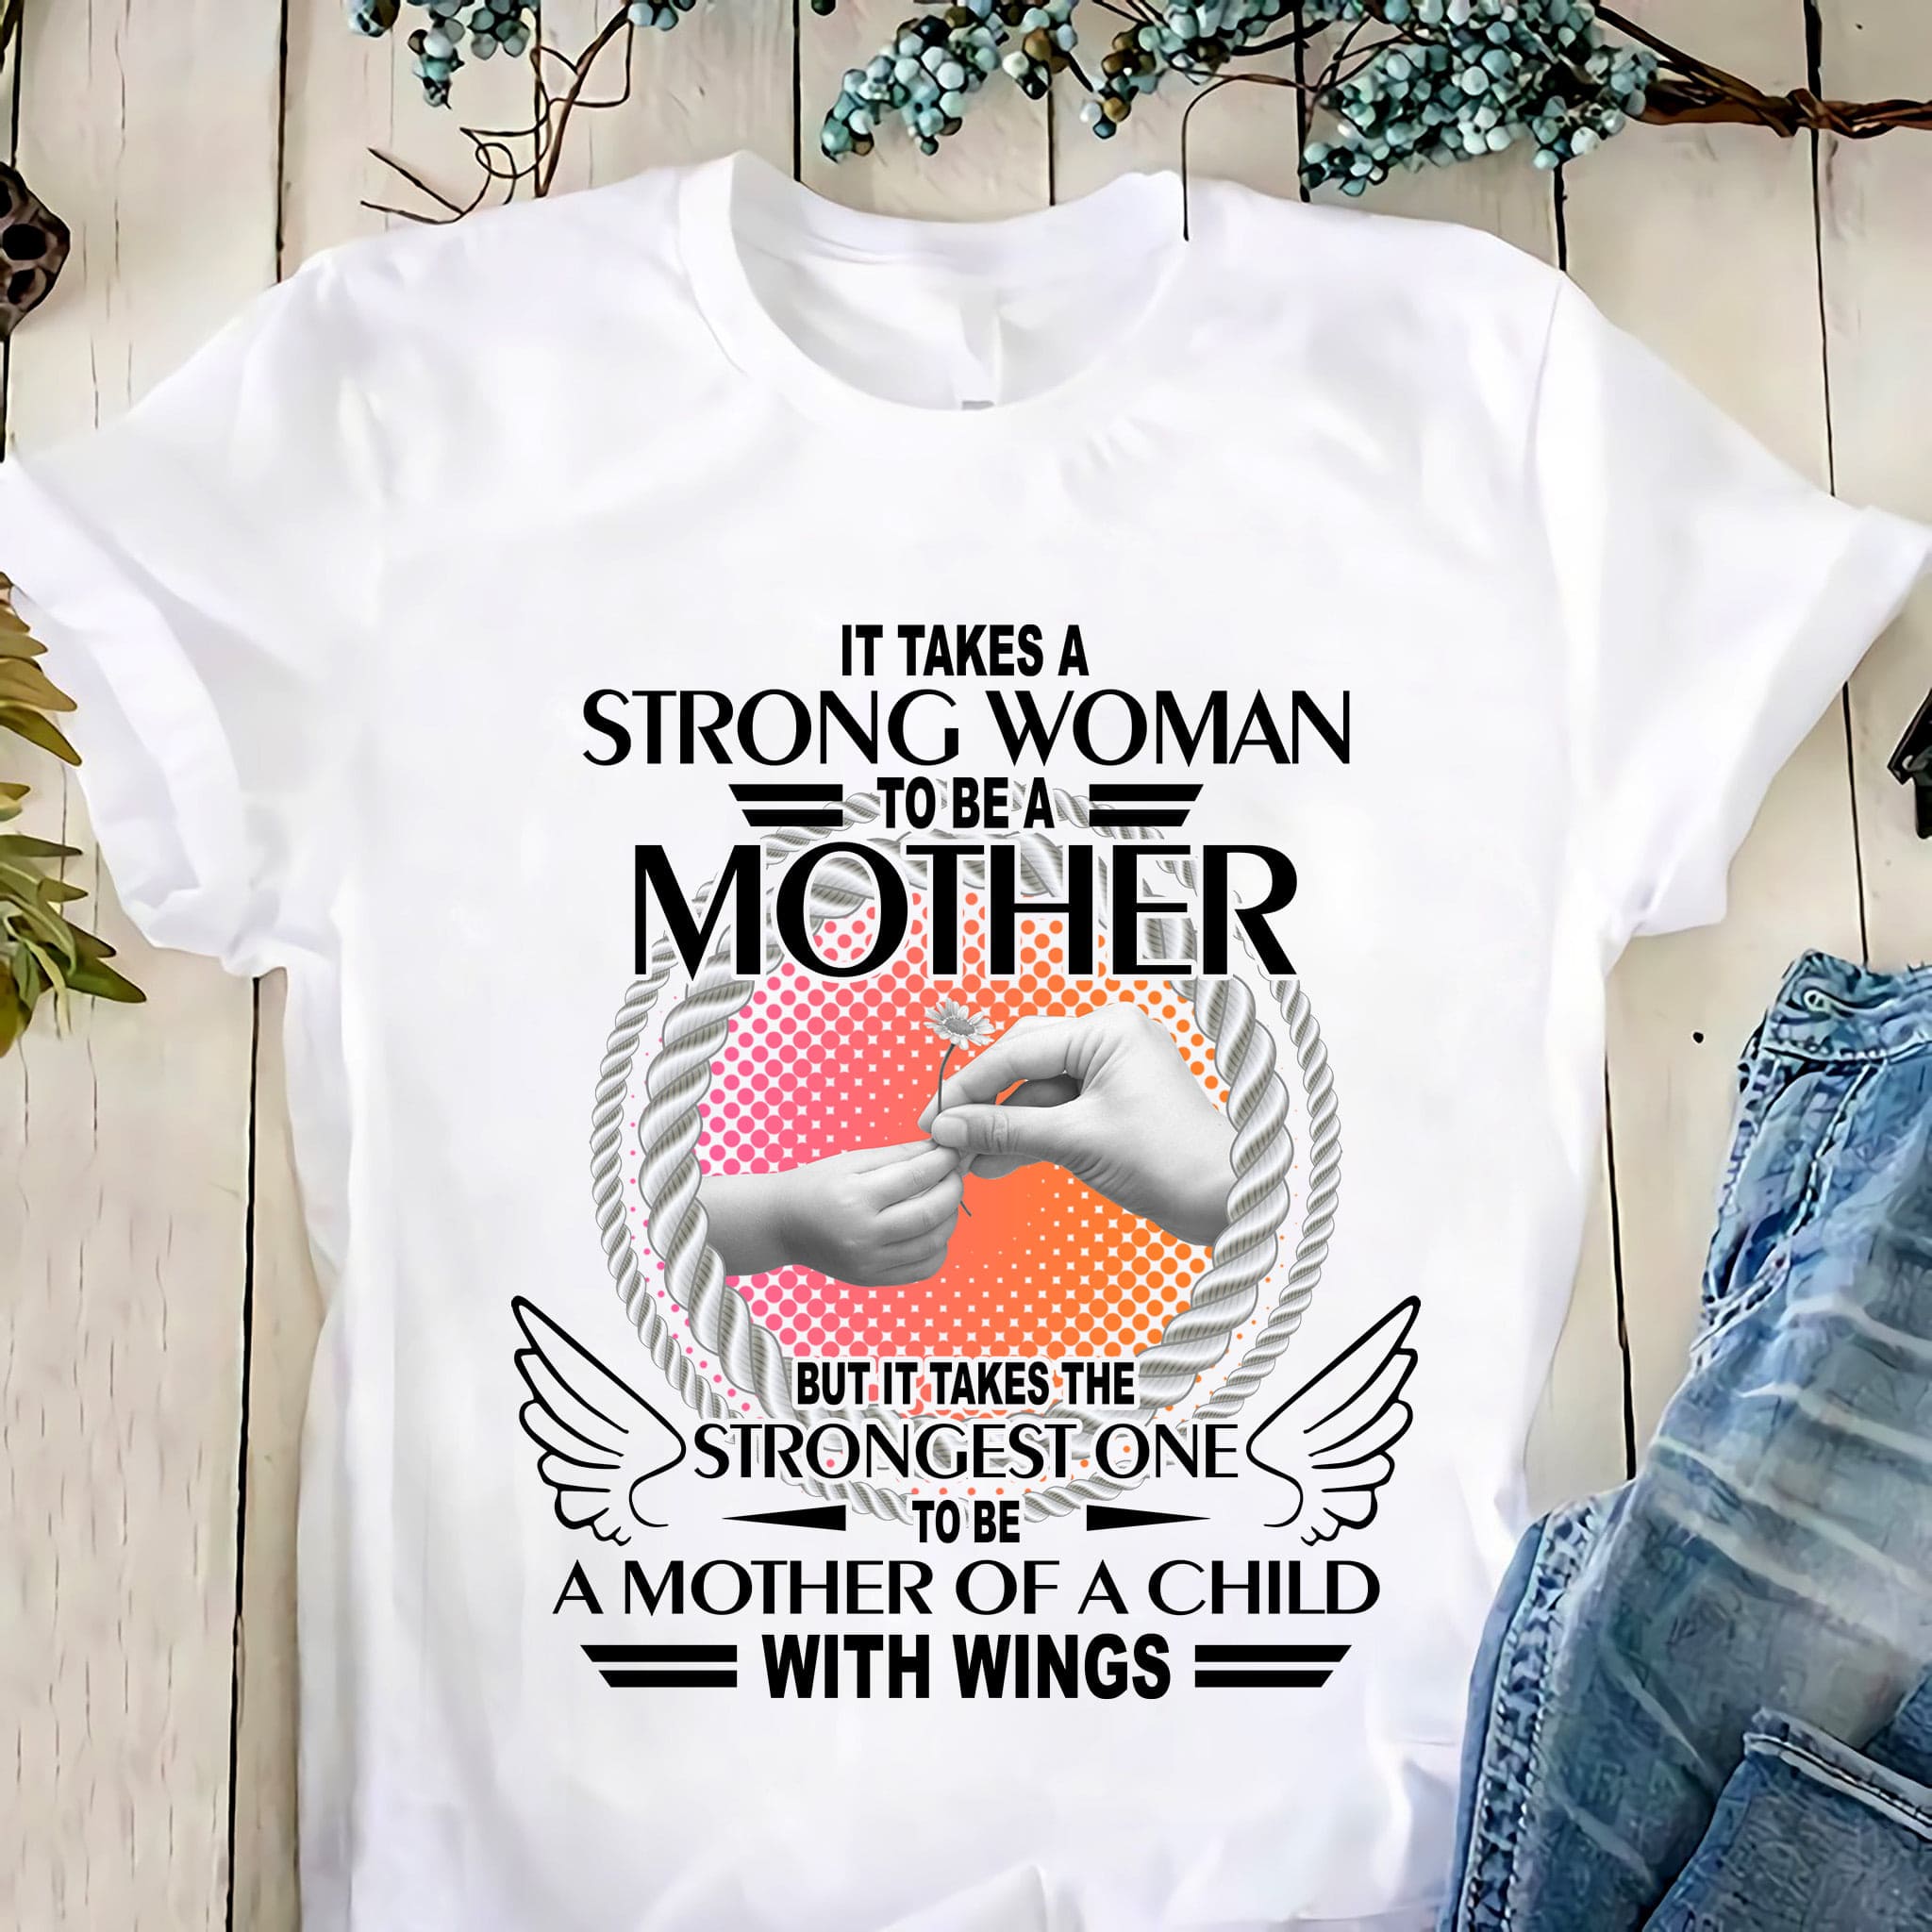 It takes a strong woman to be a mother but it takes the strongest one to be a mother of a child with wings